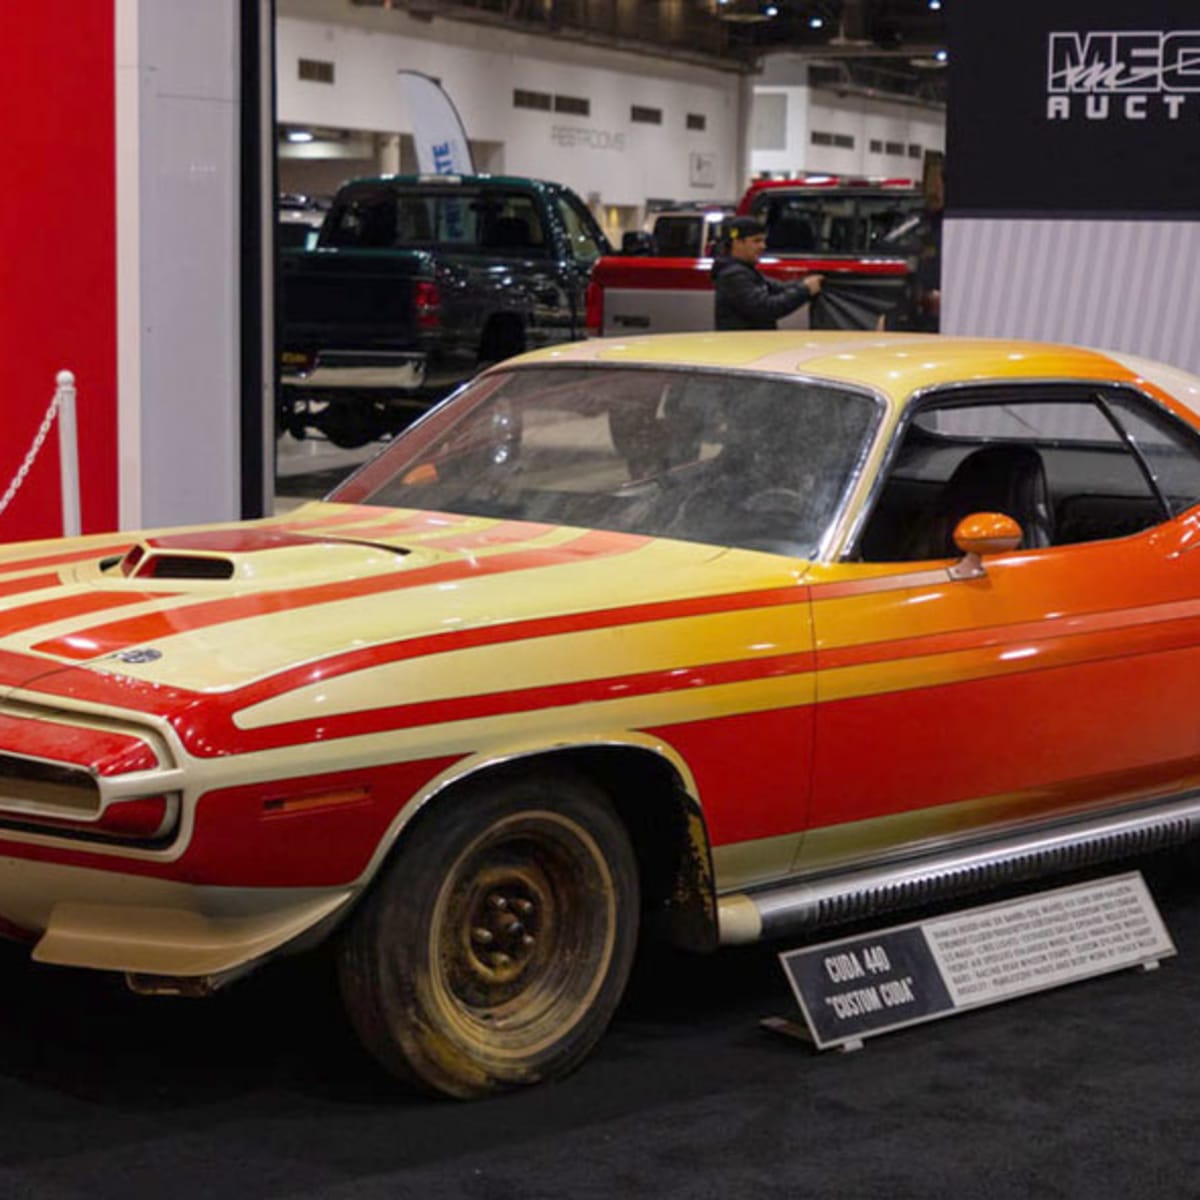 Restored Toy 1971 Plymouth Barracuda Looks Better Than Some Real